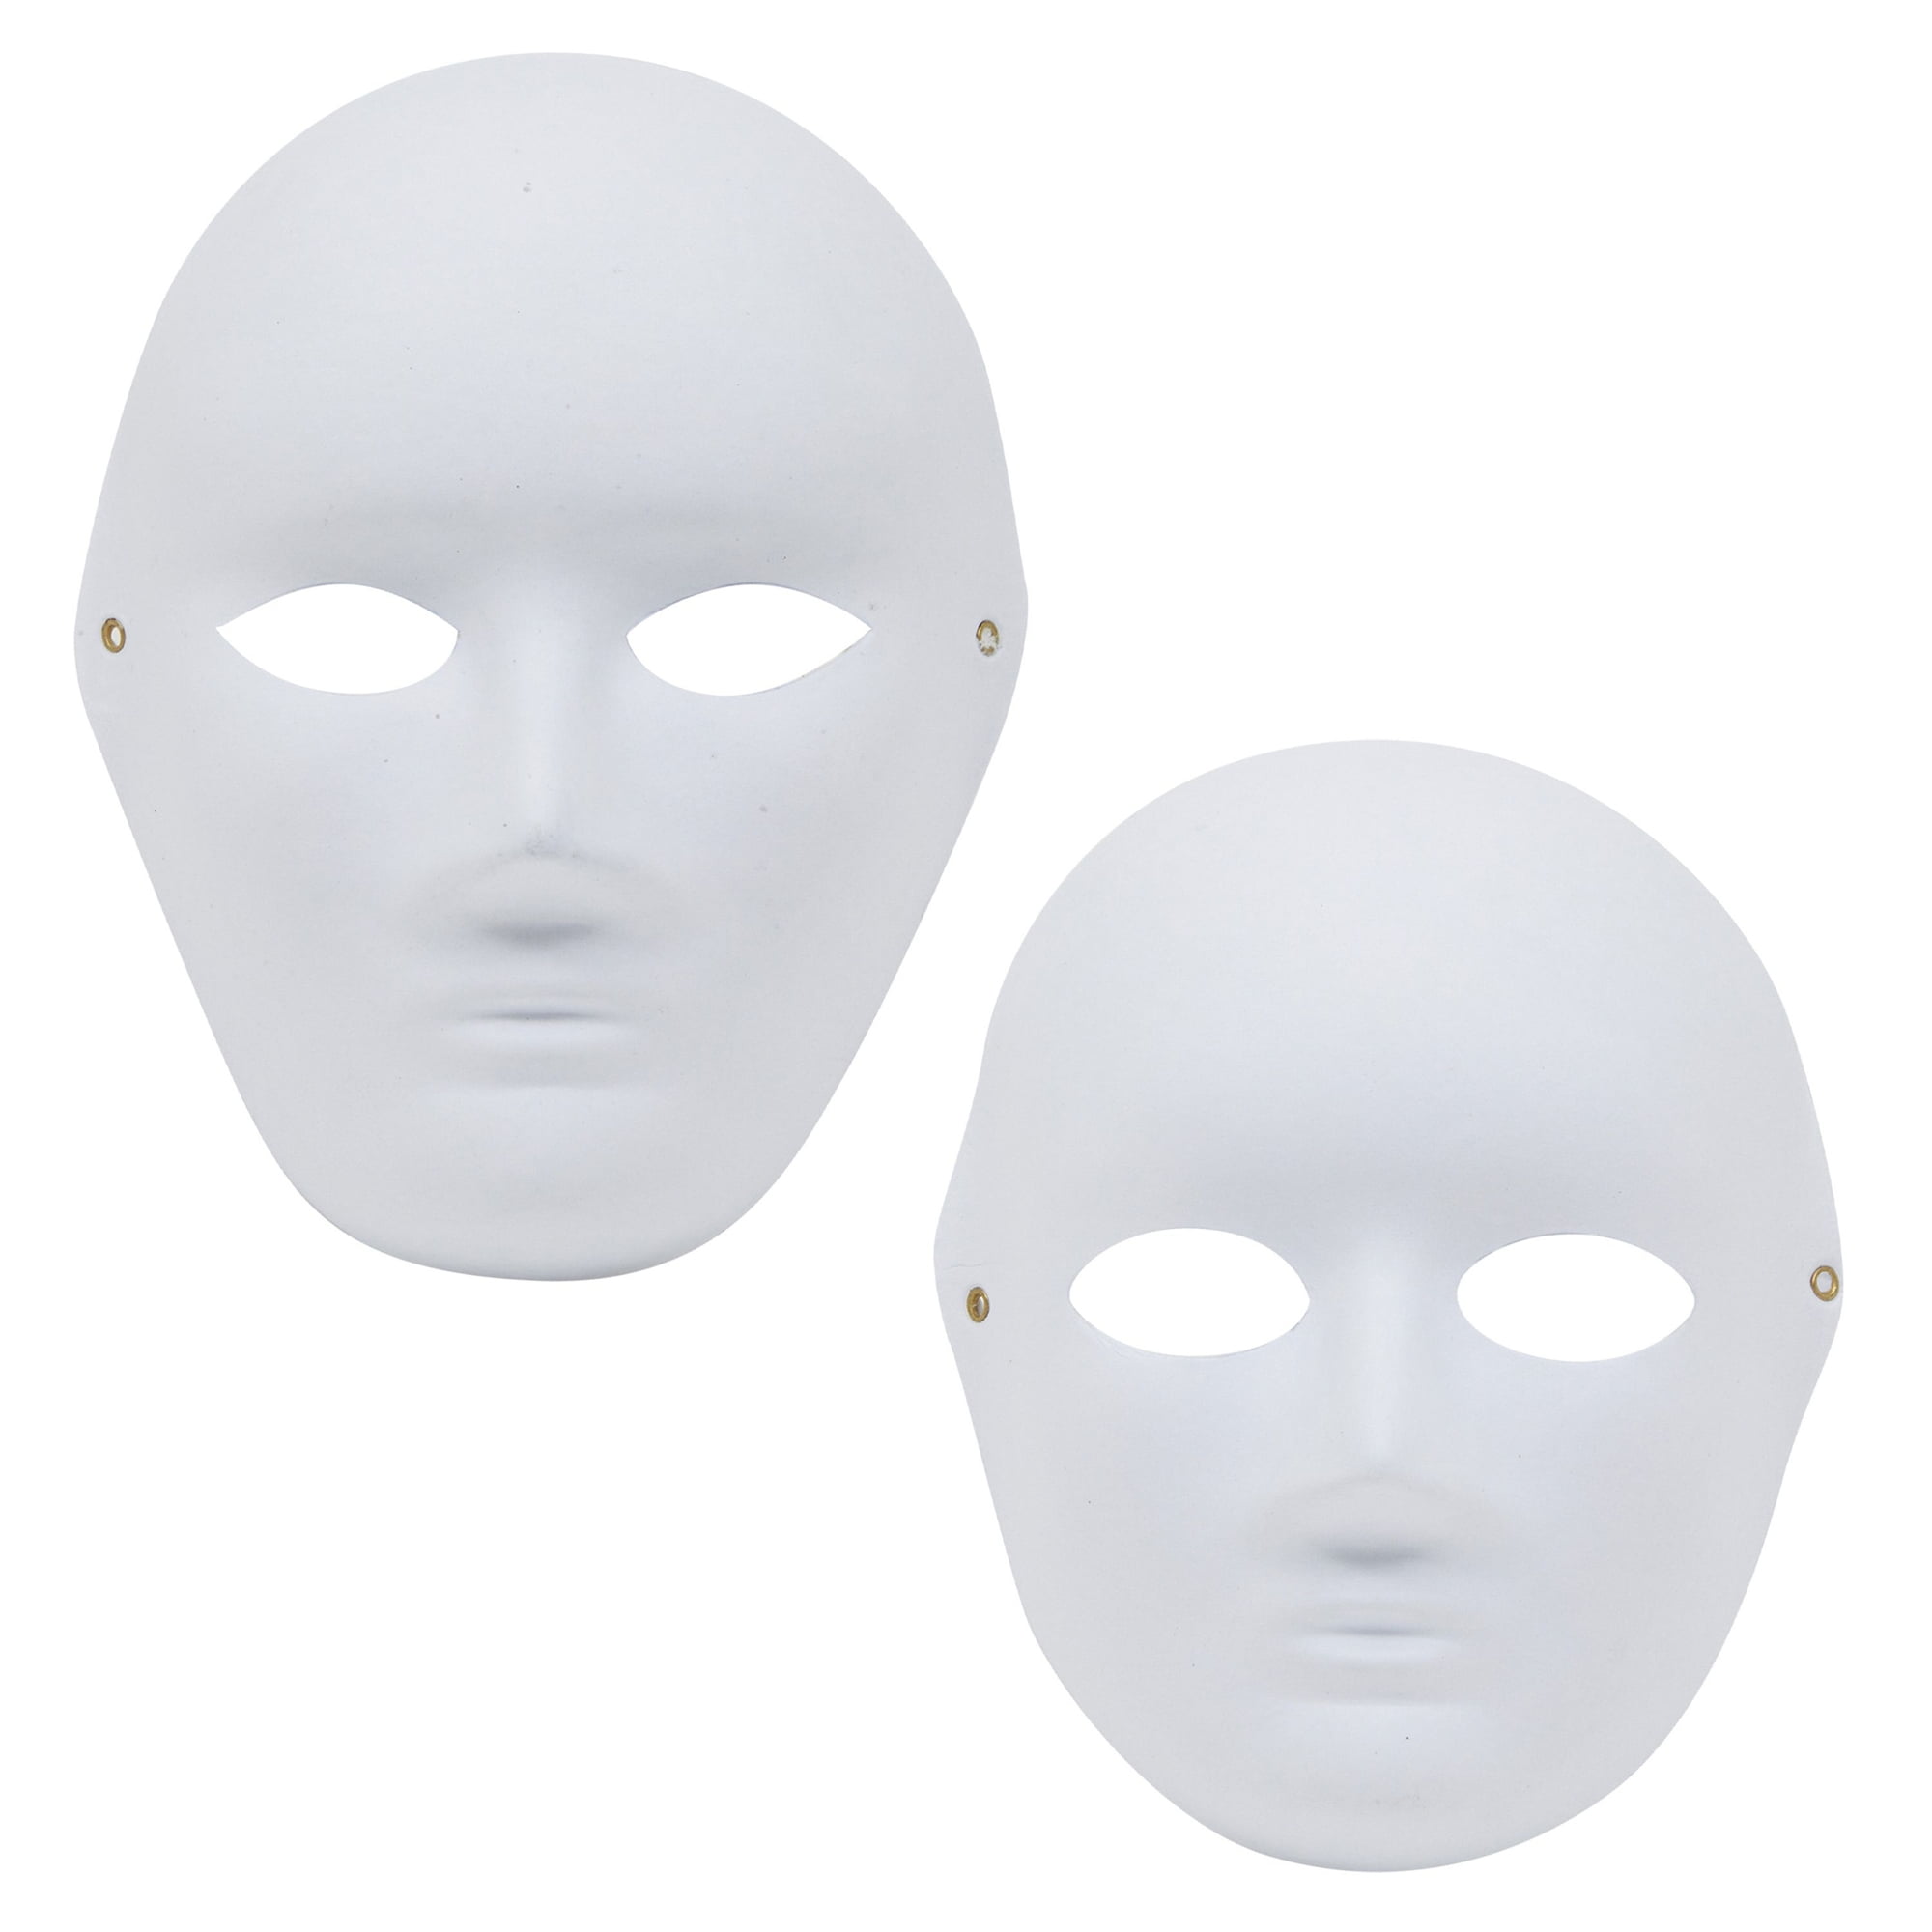 24 Pack Blank Paper Mache Masks to Decorate, White Opera Mask for Carnival,  Masquerade Party, Theatre, Halloween (2 Sizes)